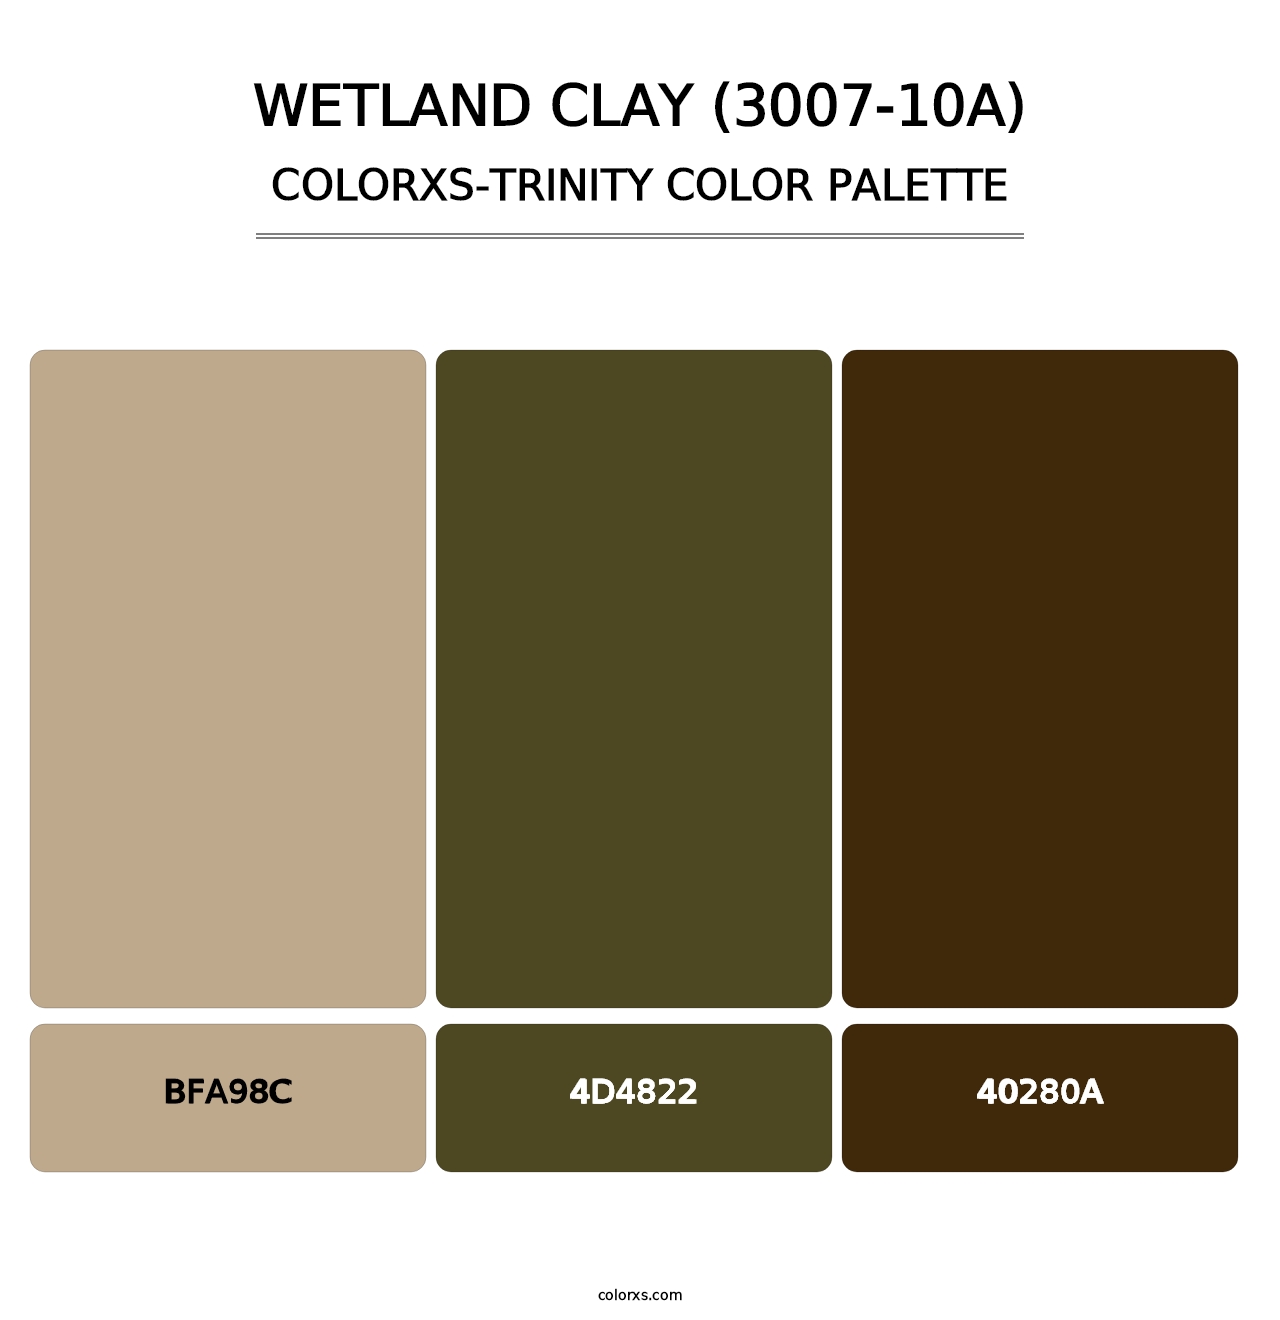 Wetland Clay (3007-10A) - Colorxs Trinity Palette